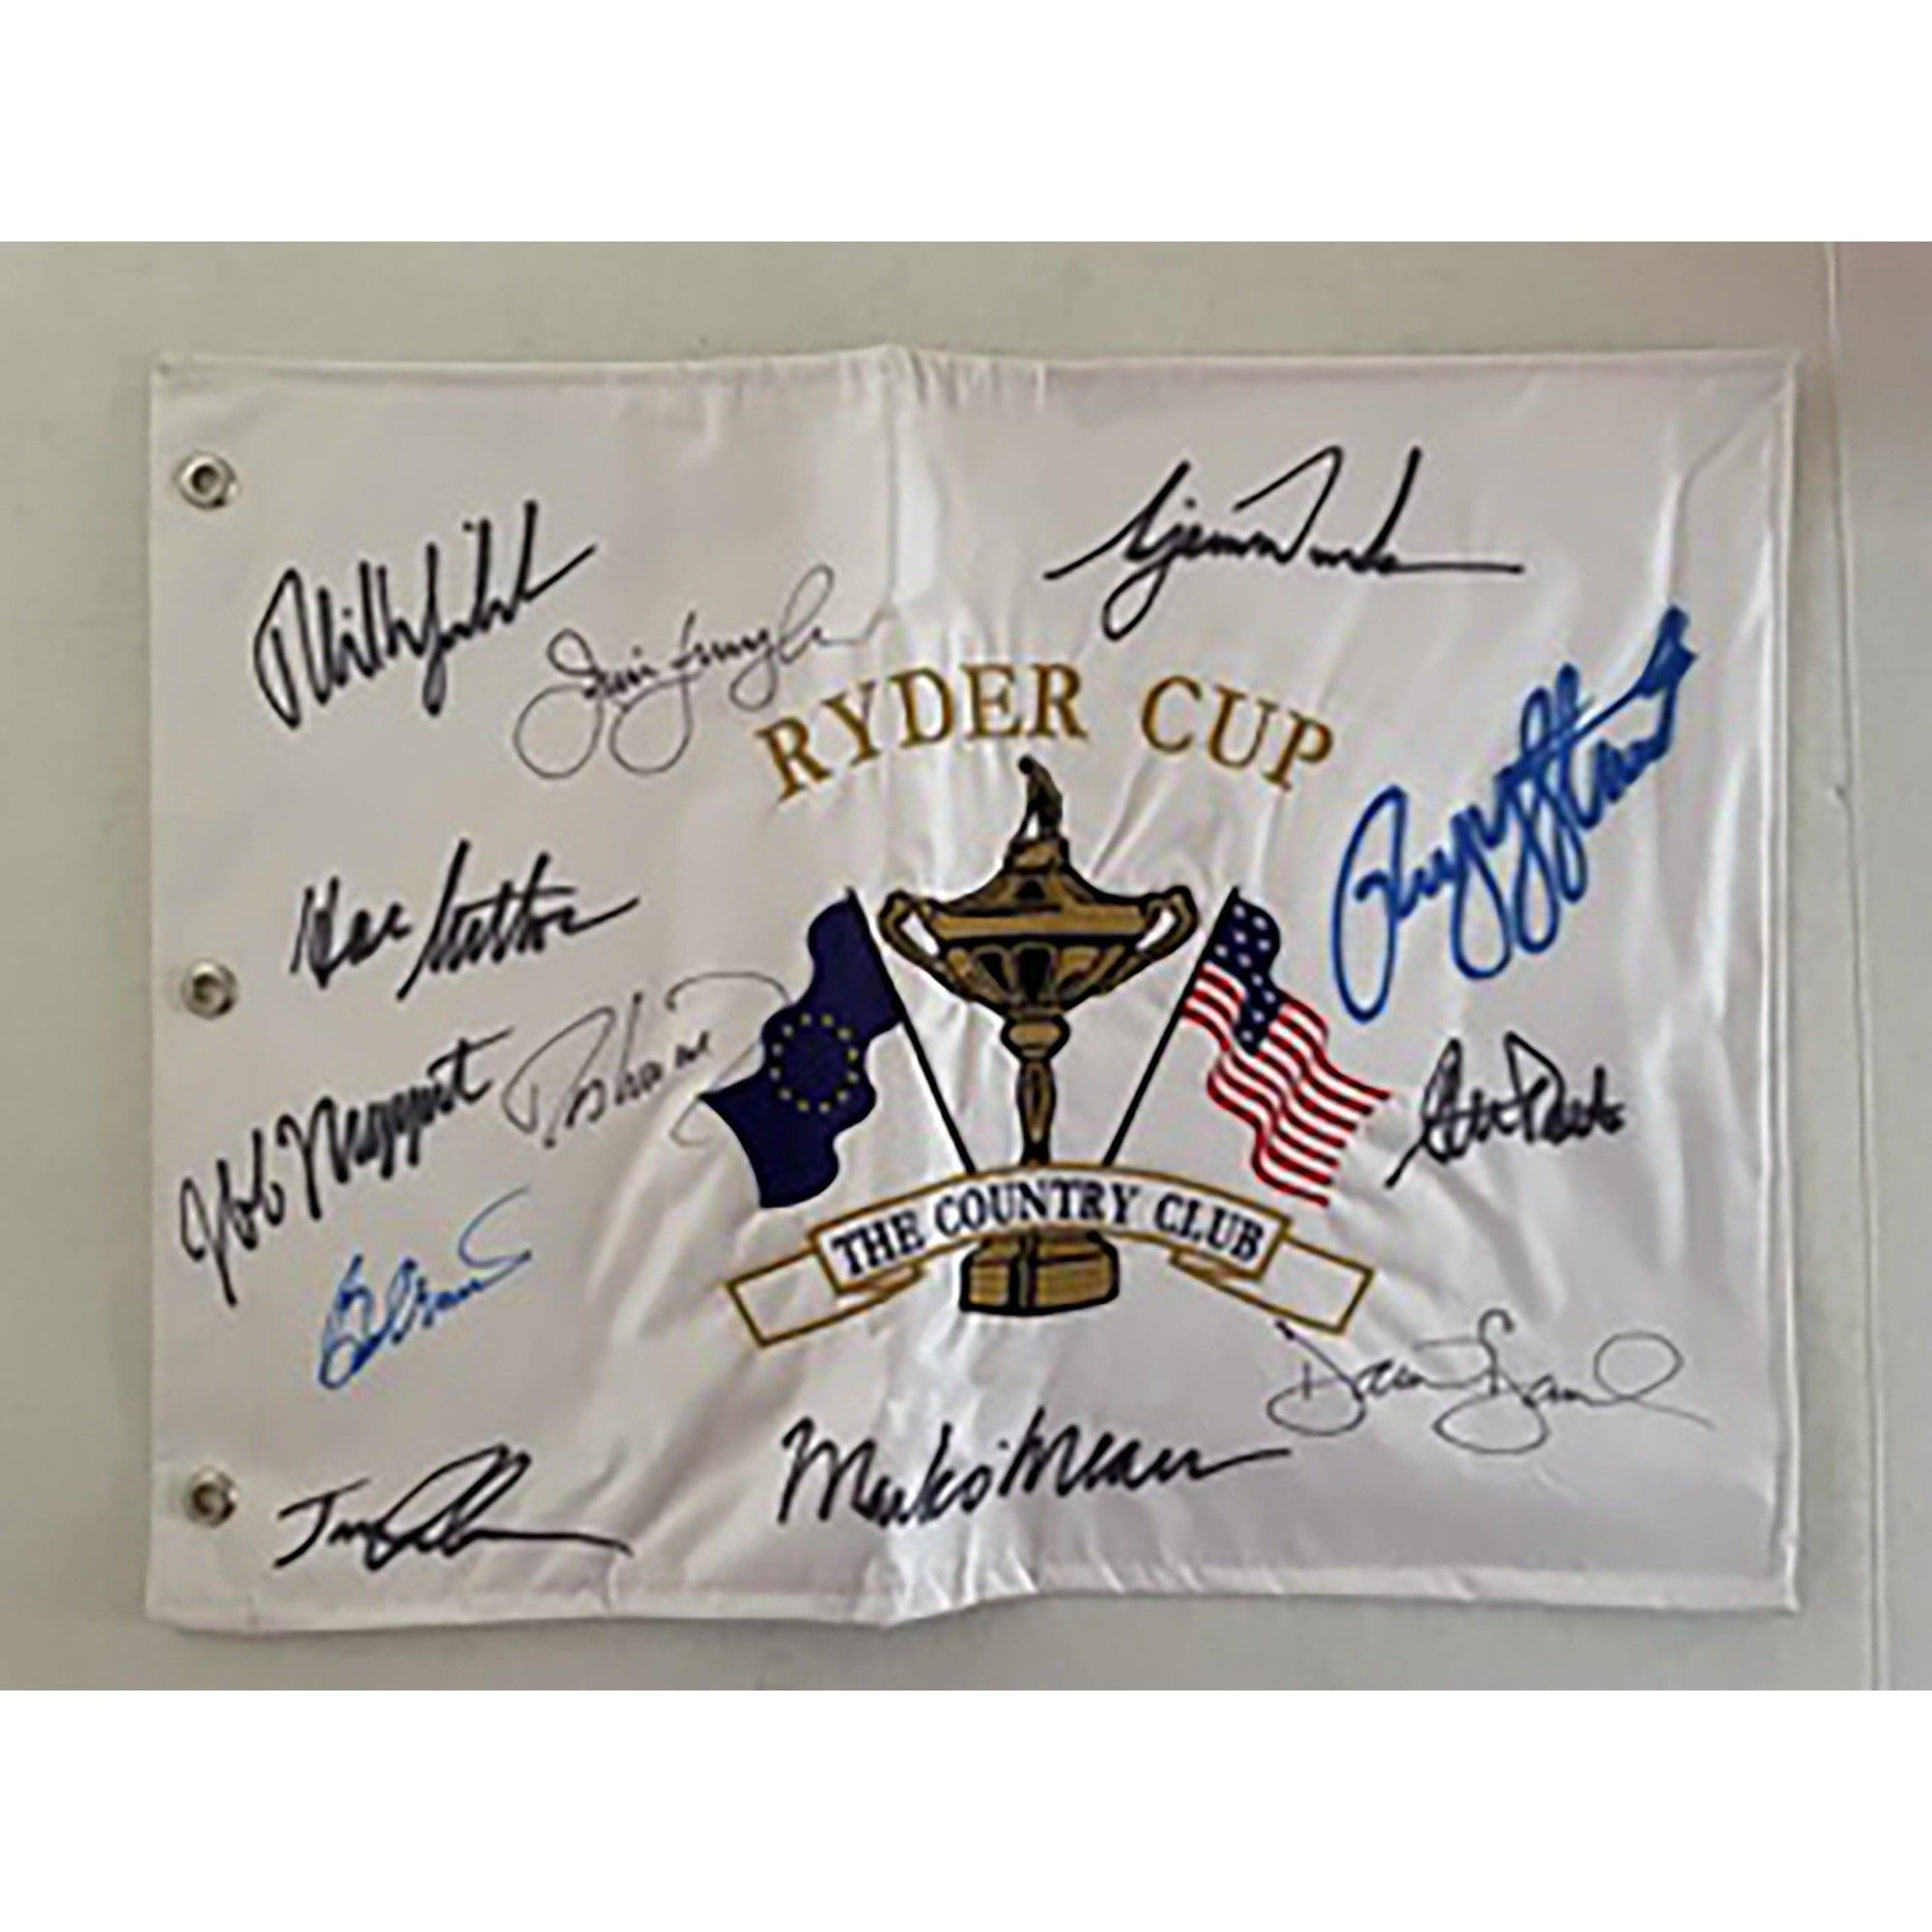 1999 Ryder Cup Flag Payne Stewart, Tiger Woods, Phil Mickelson signed with proof